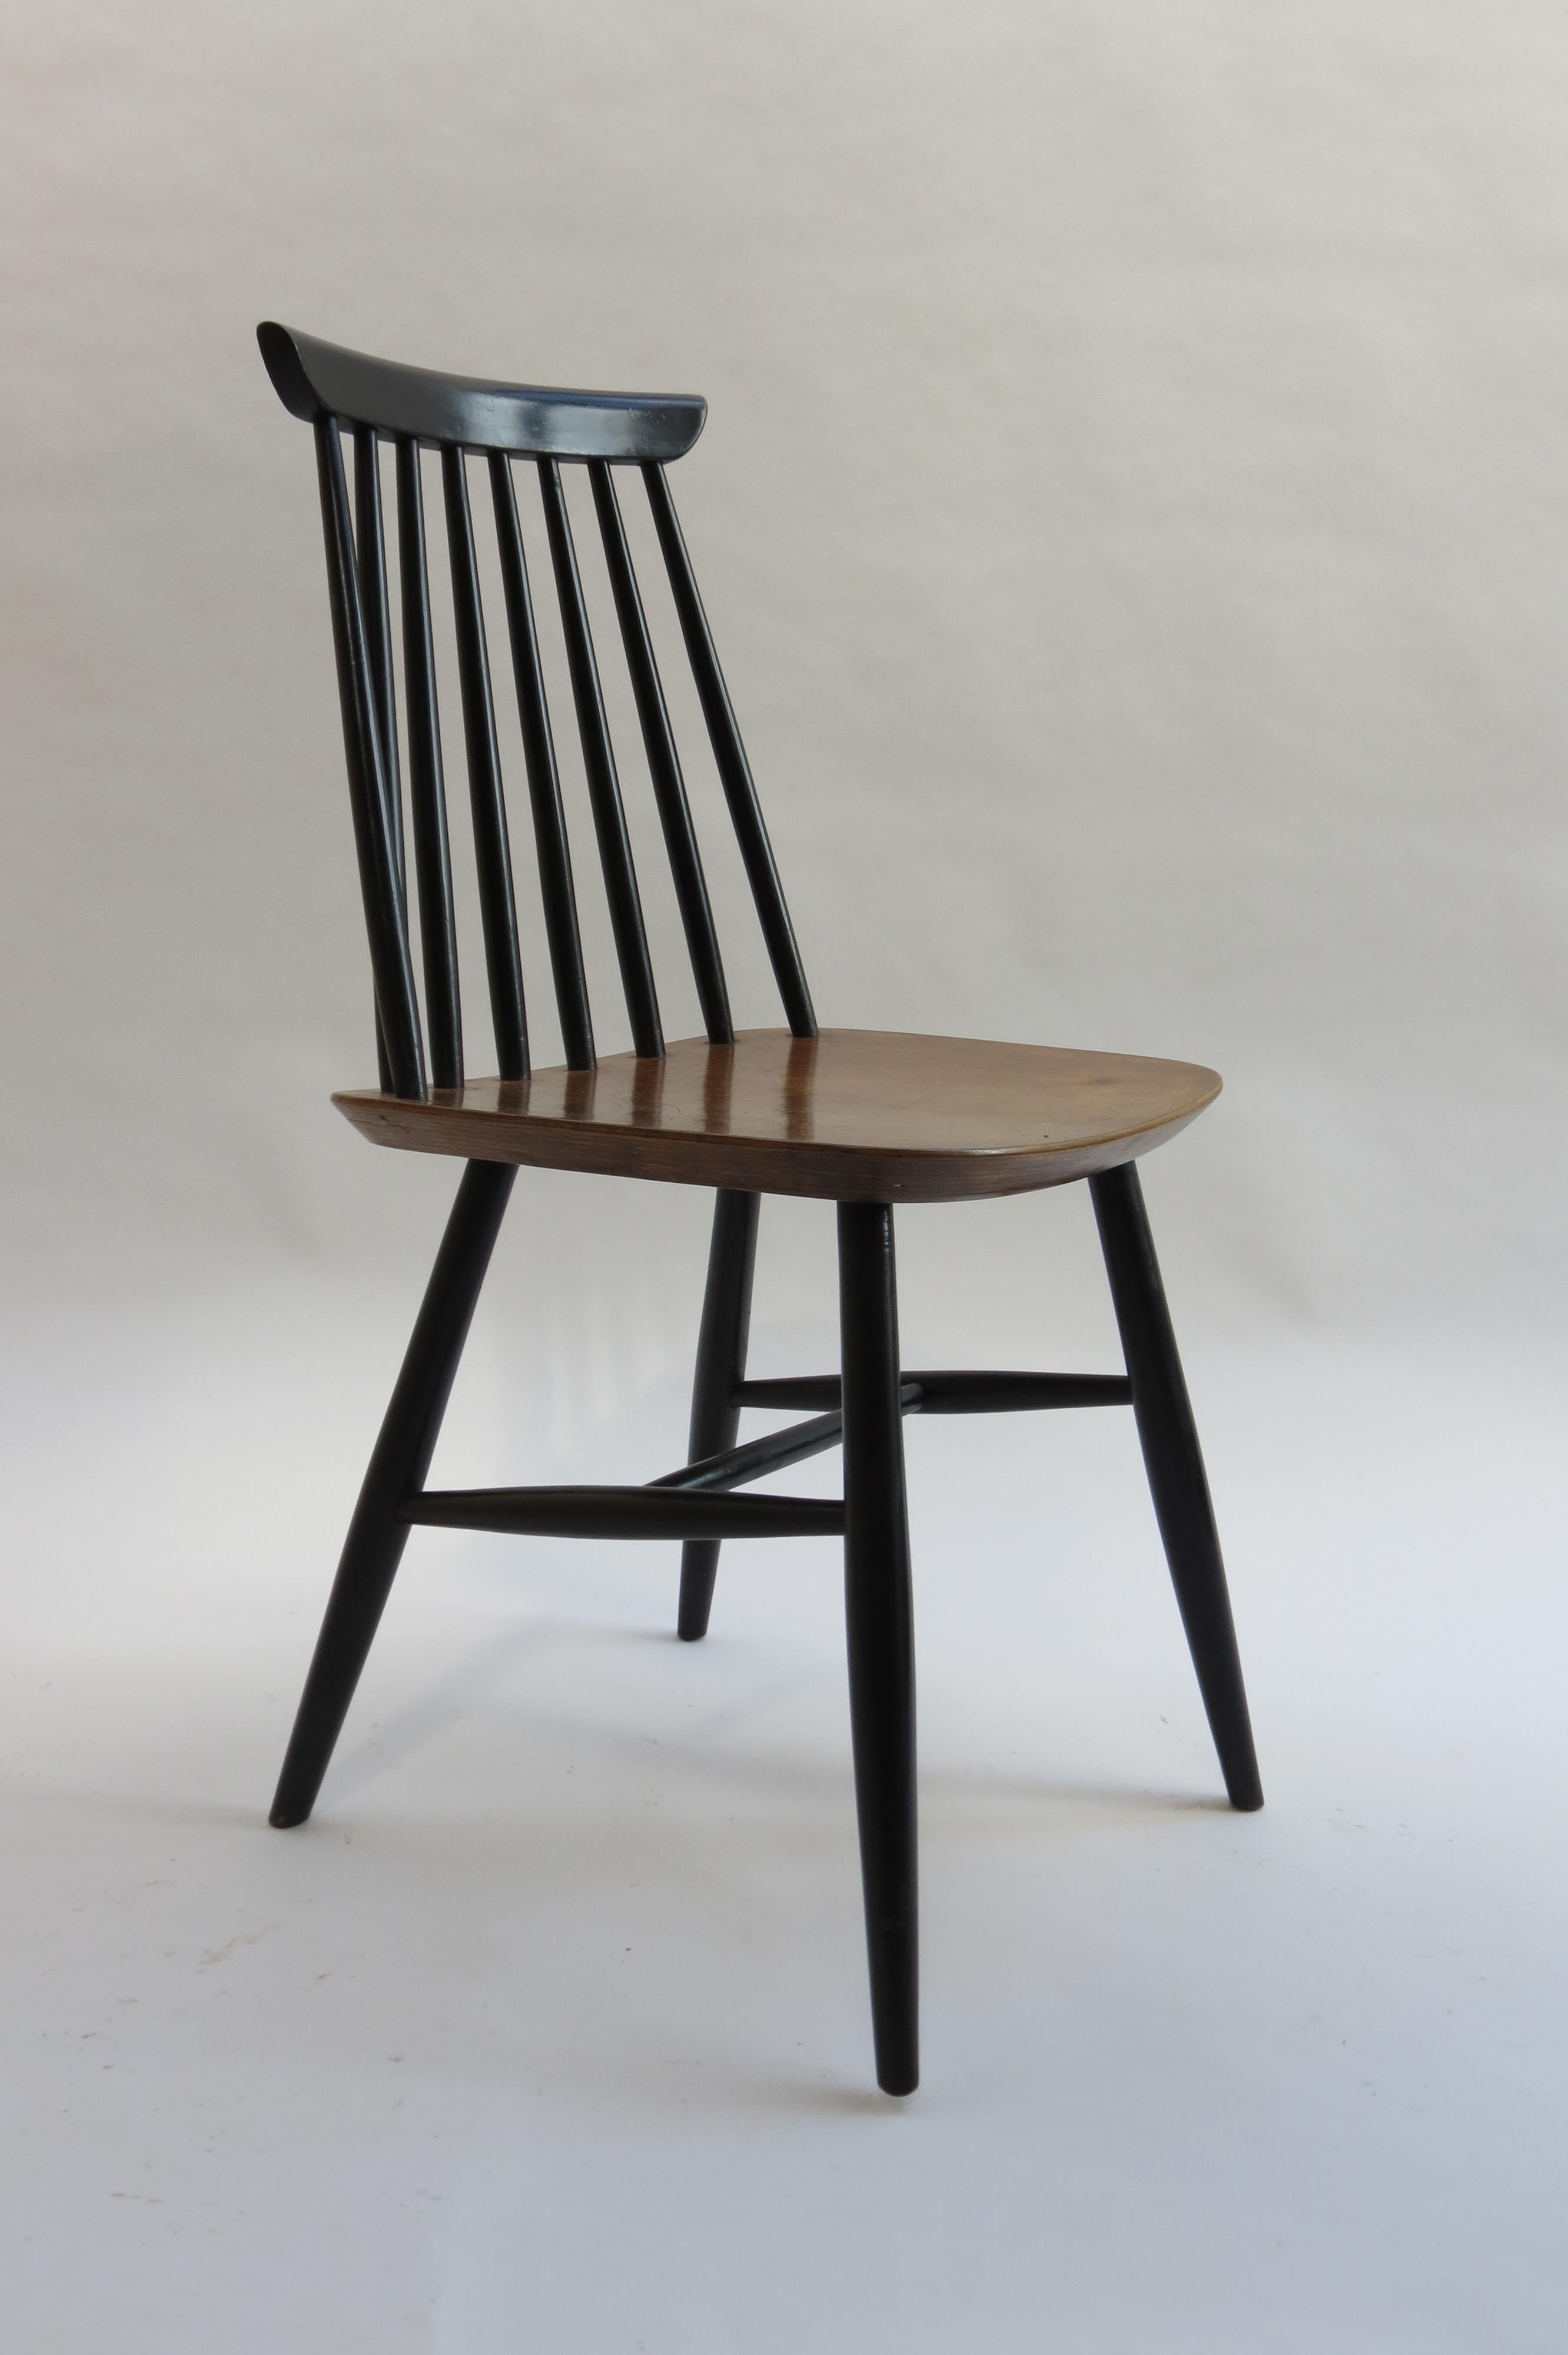 Very good quality dining chair in the style of Imari Tapiovaara. Designed in the 1950s. Ebonized beech legs and back spindles and walnut veneered seats.

In good vintage condition, very nicely patinated throughout. With minimal wear to the edges